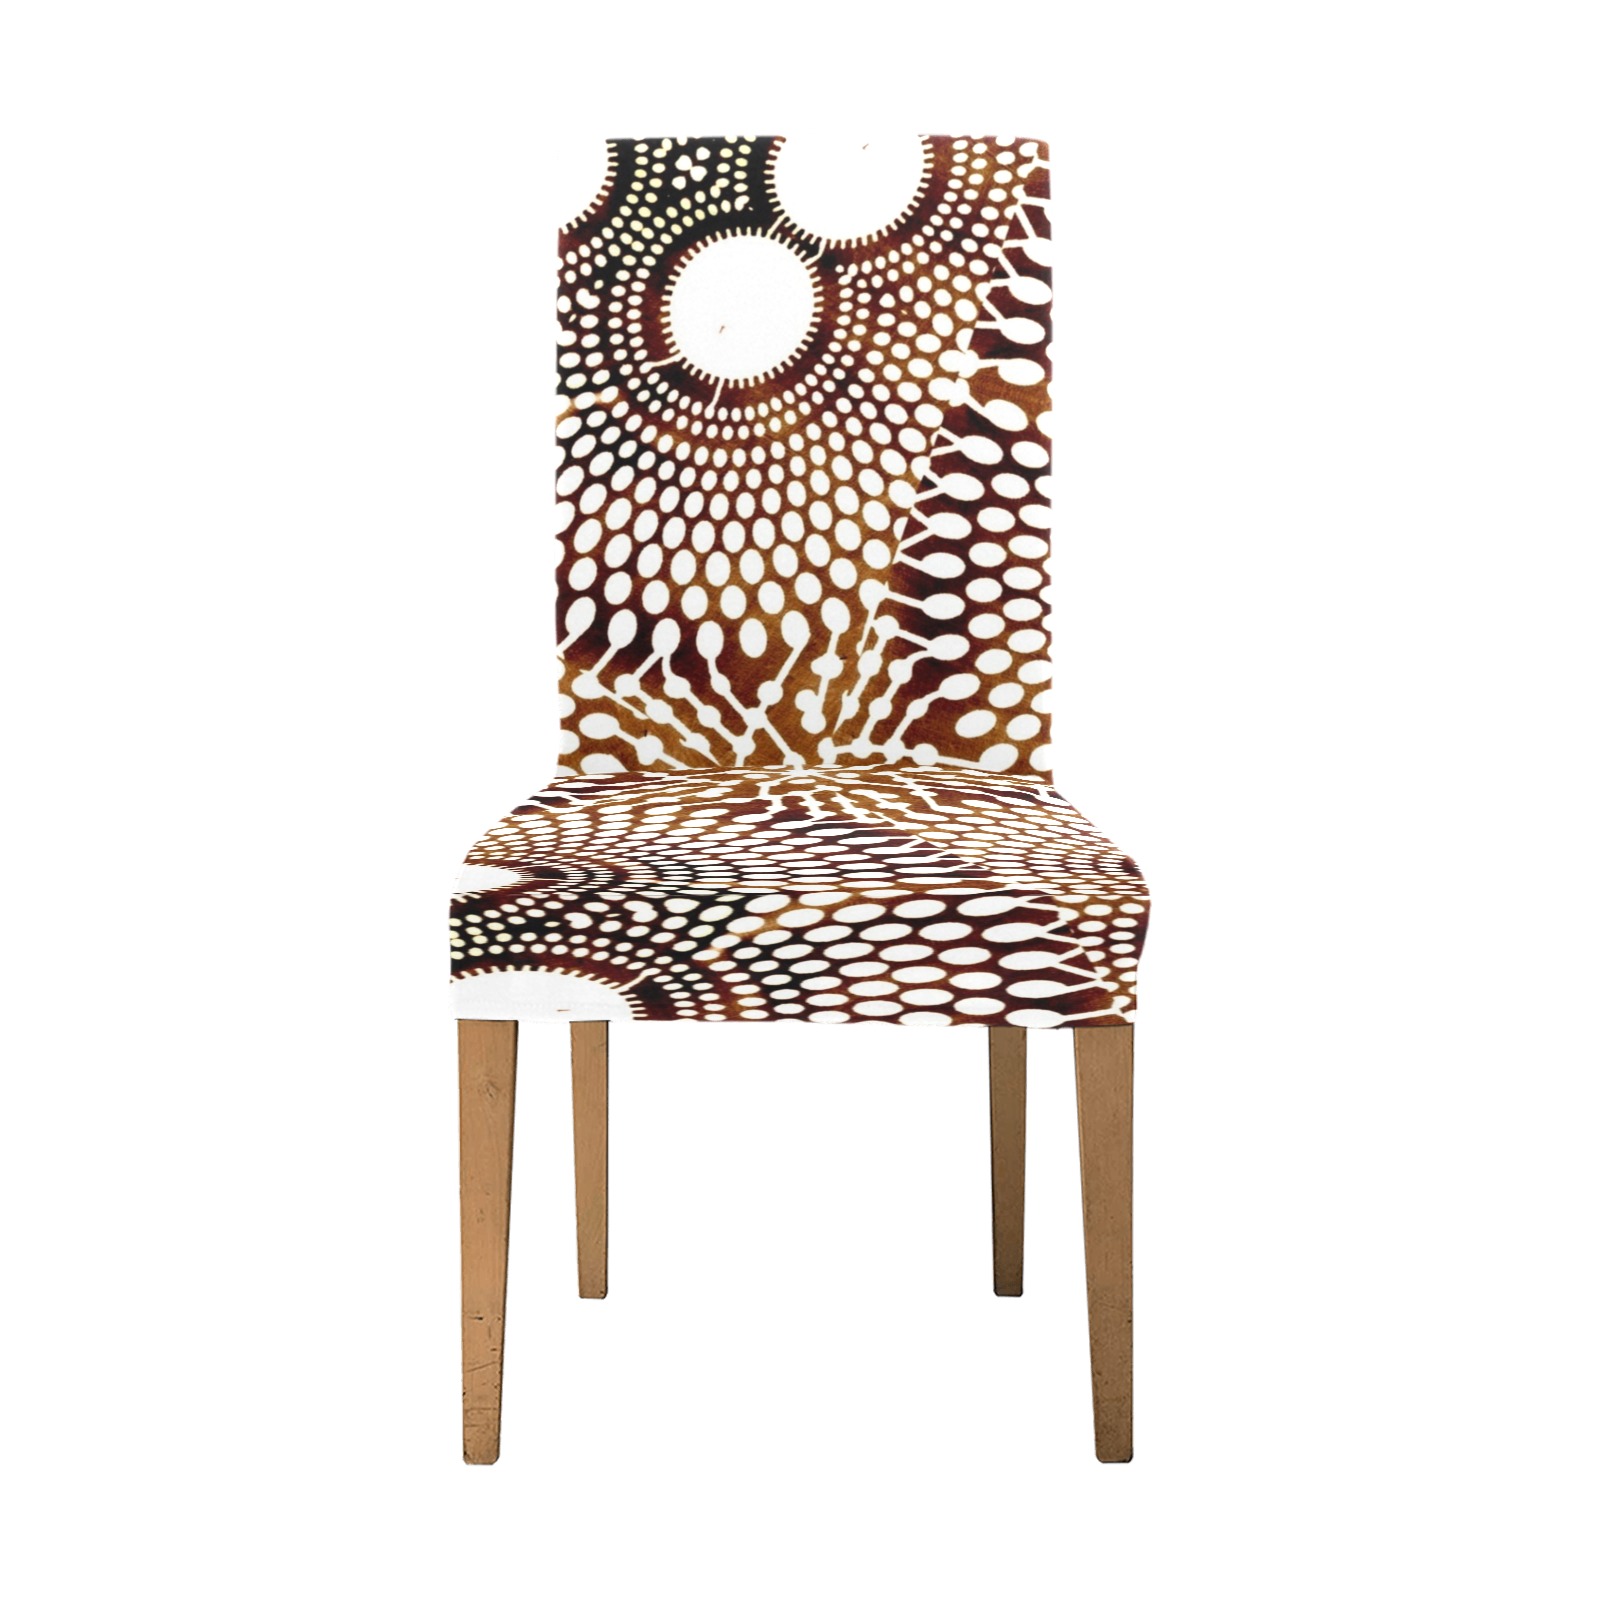 AFRICAN PRINT PATTERN 4 Chair Cover (Pack of 4)